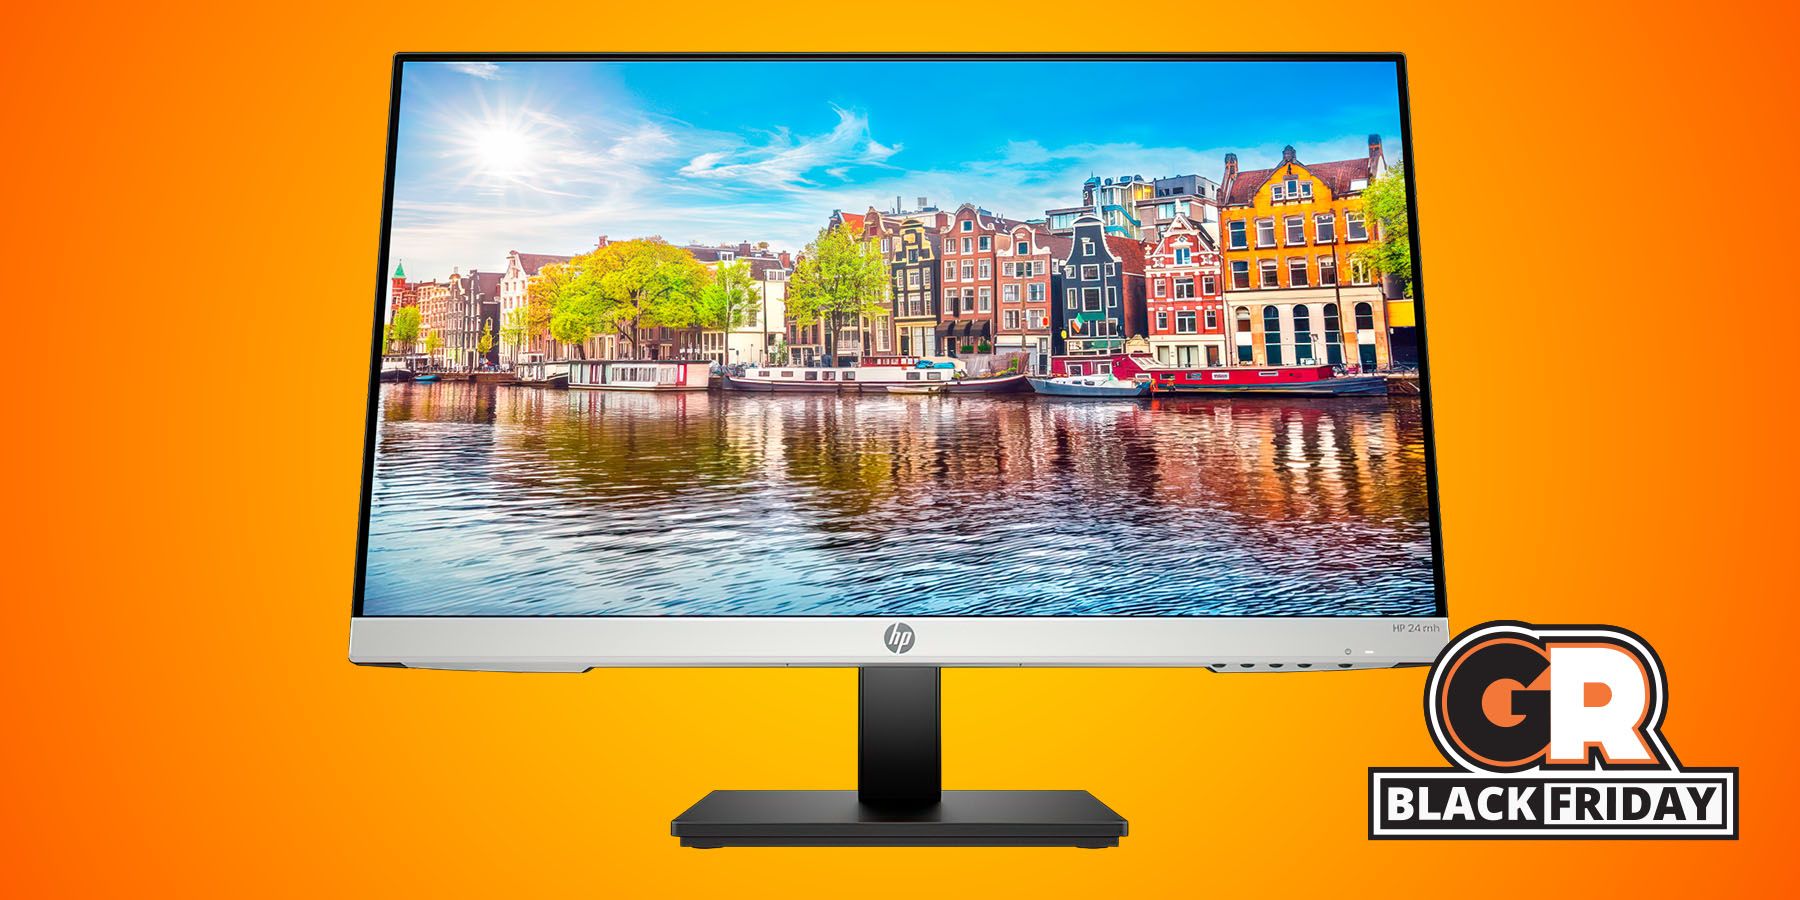 HP 24mh FHD Computer Monitor Gets Limited-Time Black Friday Discount